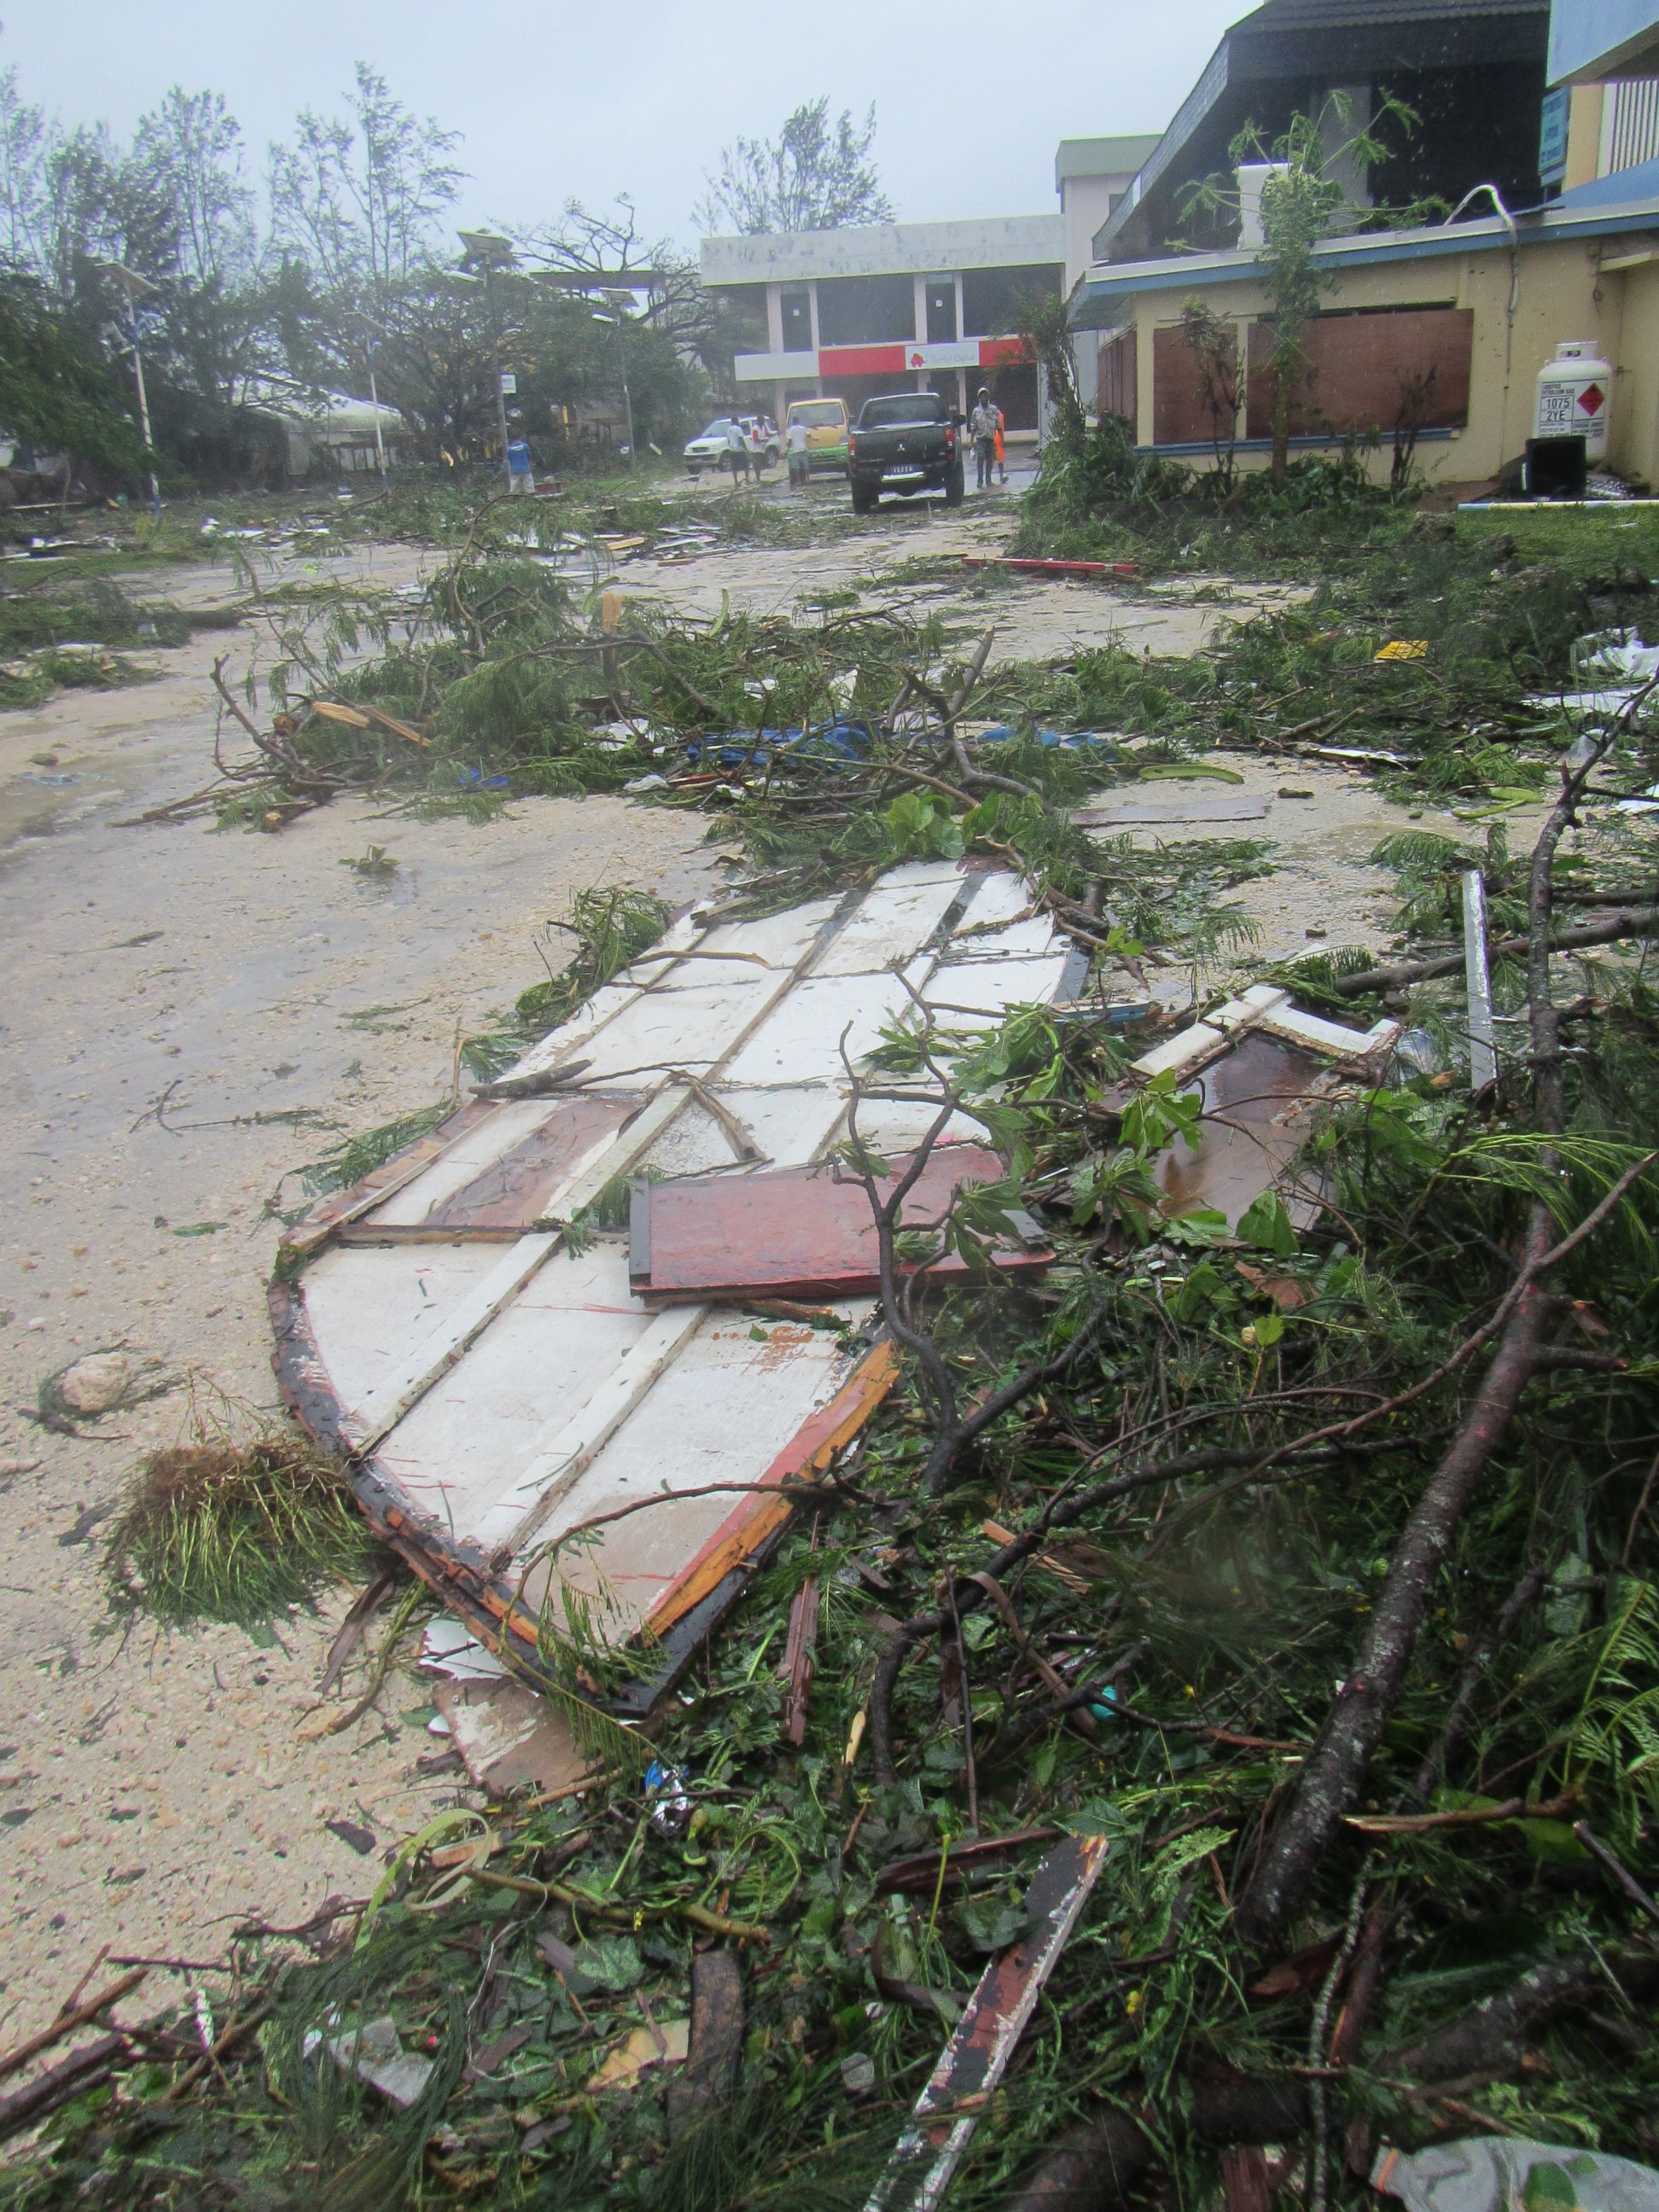 PHOTO: Damage from a tropical cyclone can be seen in Port Vila, Vanuatu, March 14, 2015.